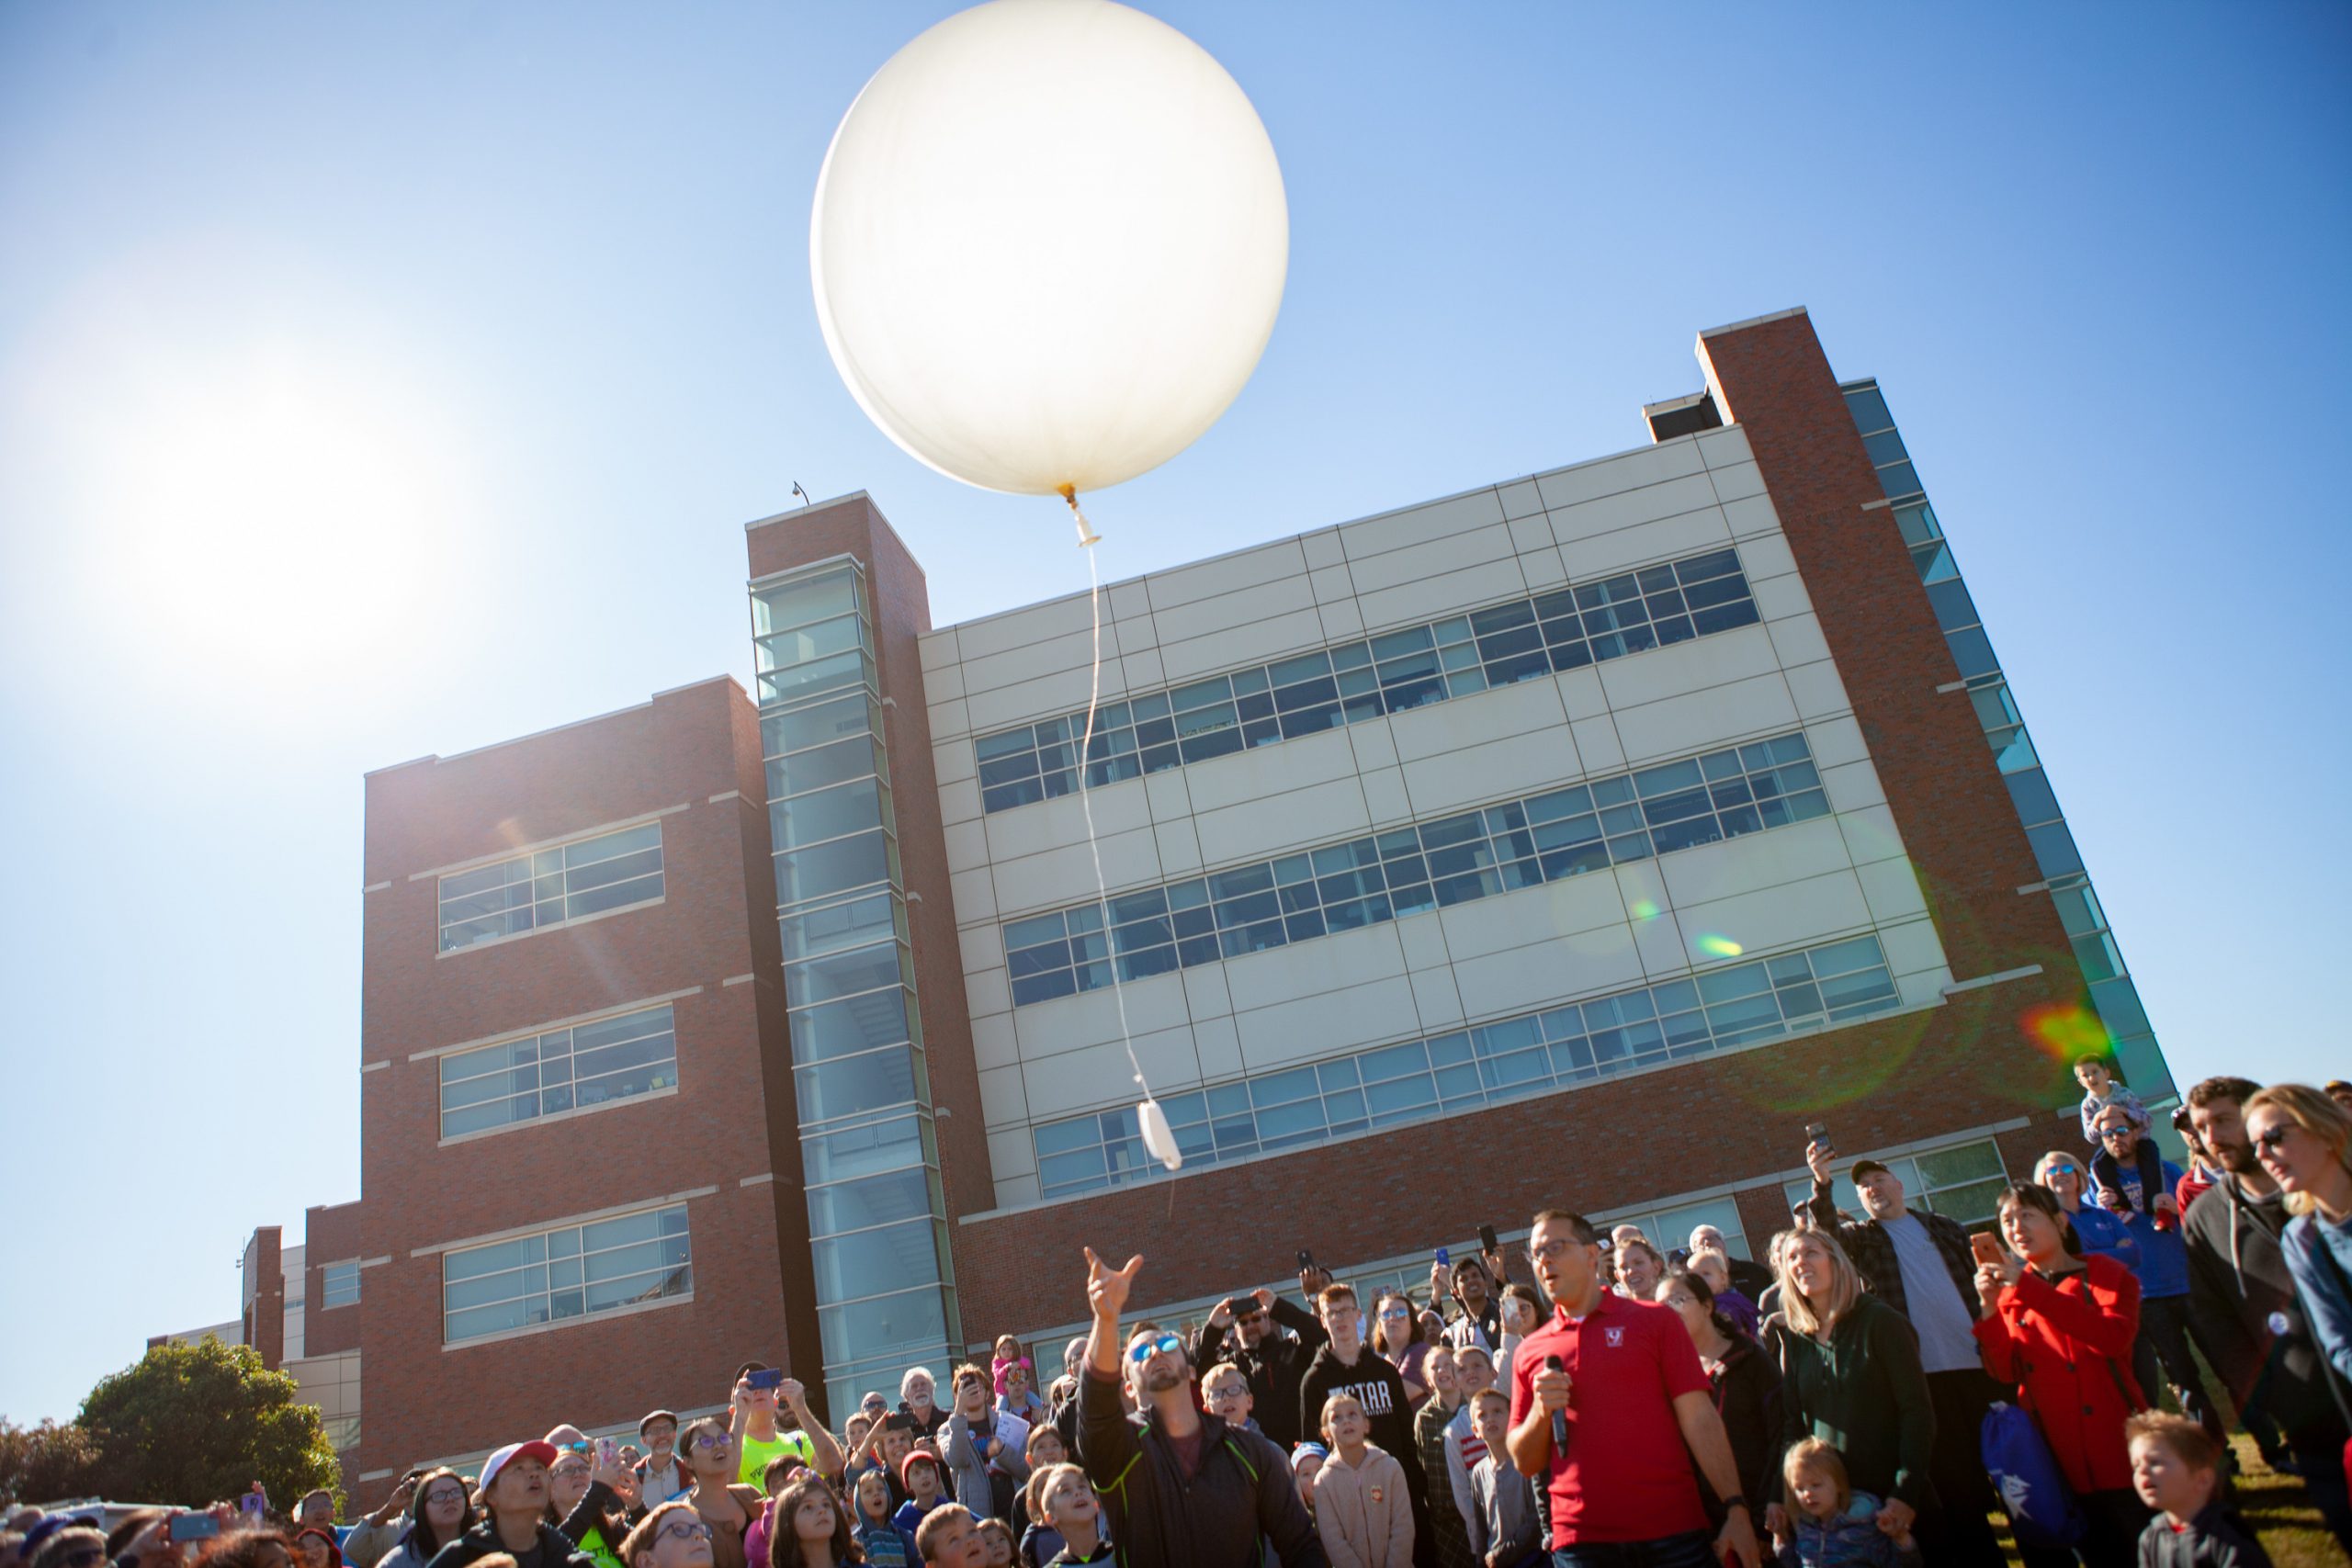 A weather balloon being launched in front of the National Weather Center building.